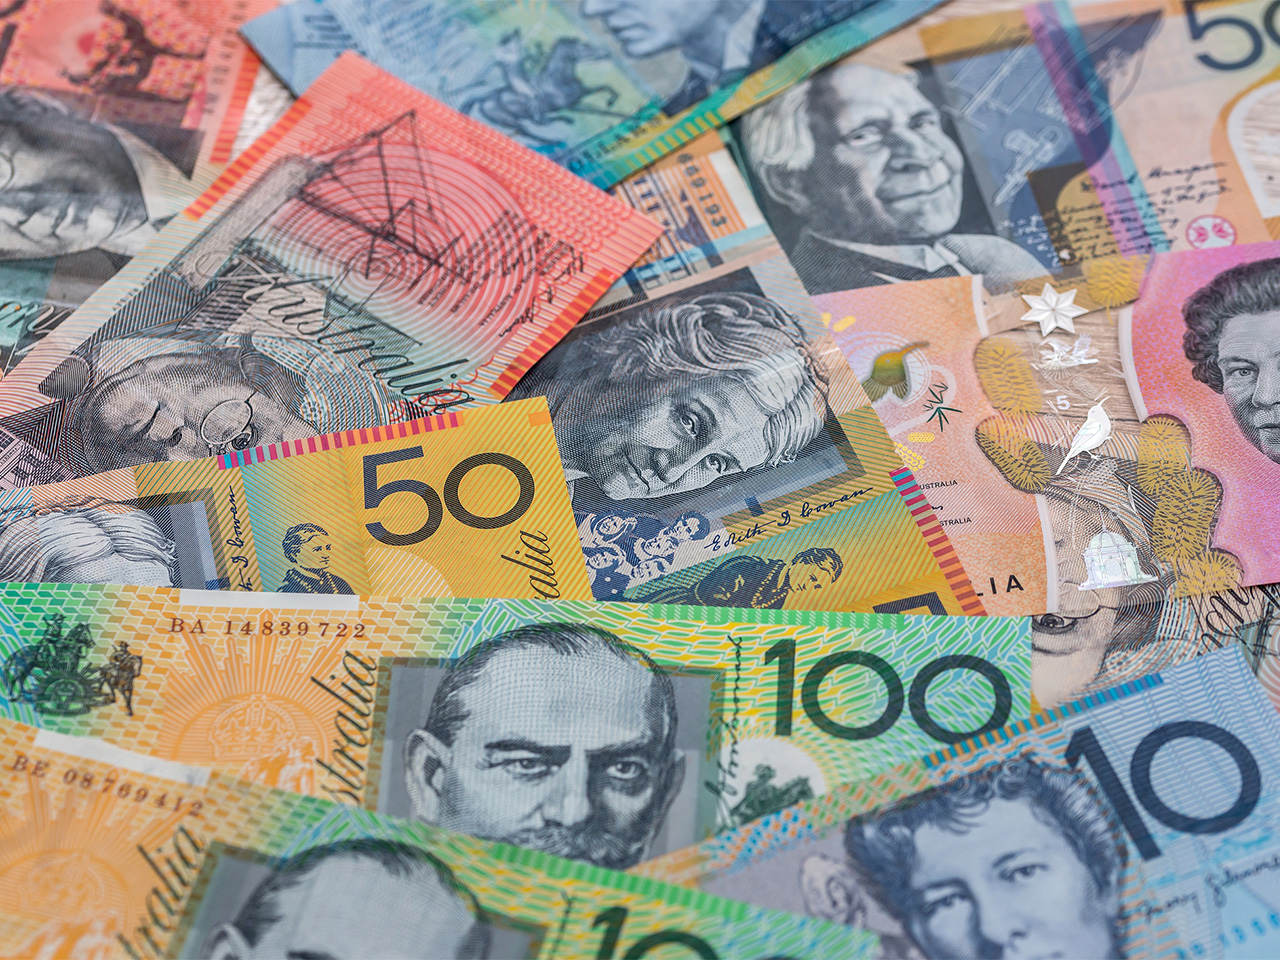 Australian bank notes in a range of denominations scattered on a surface.